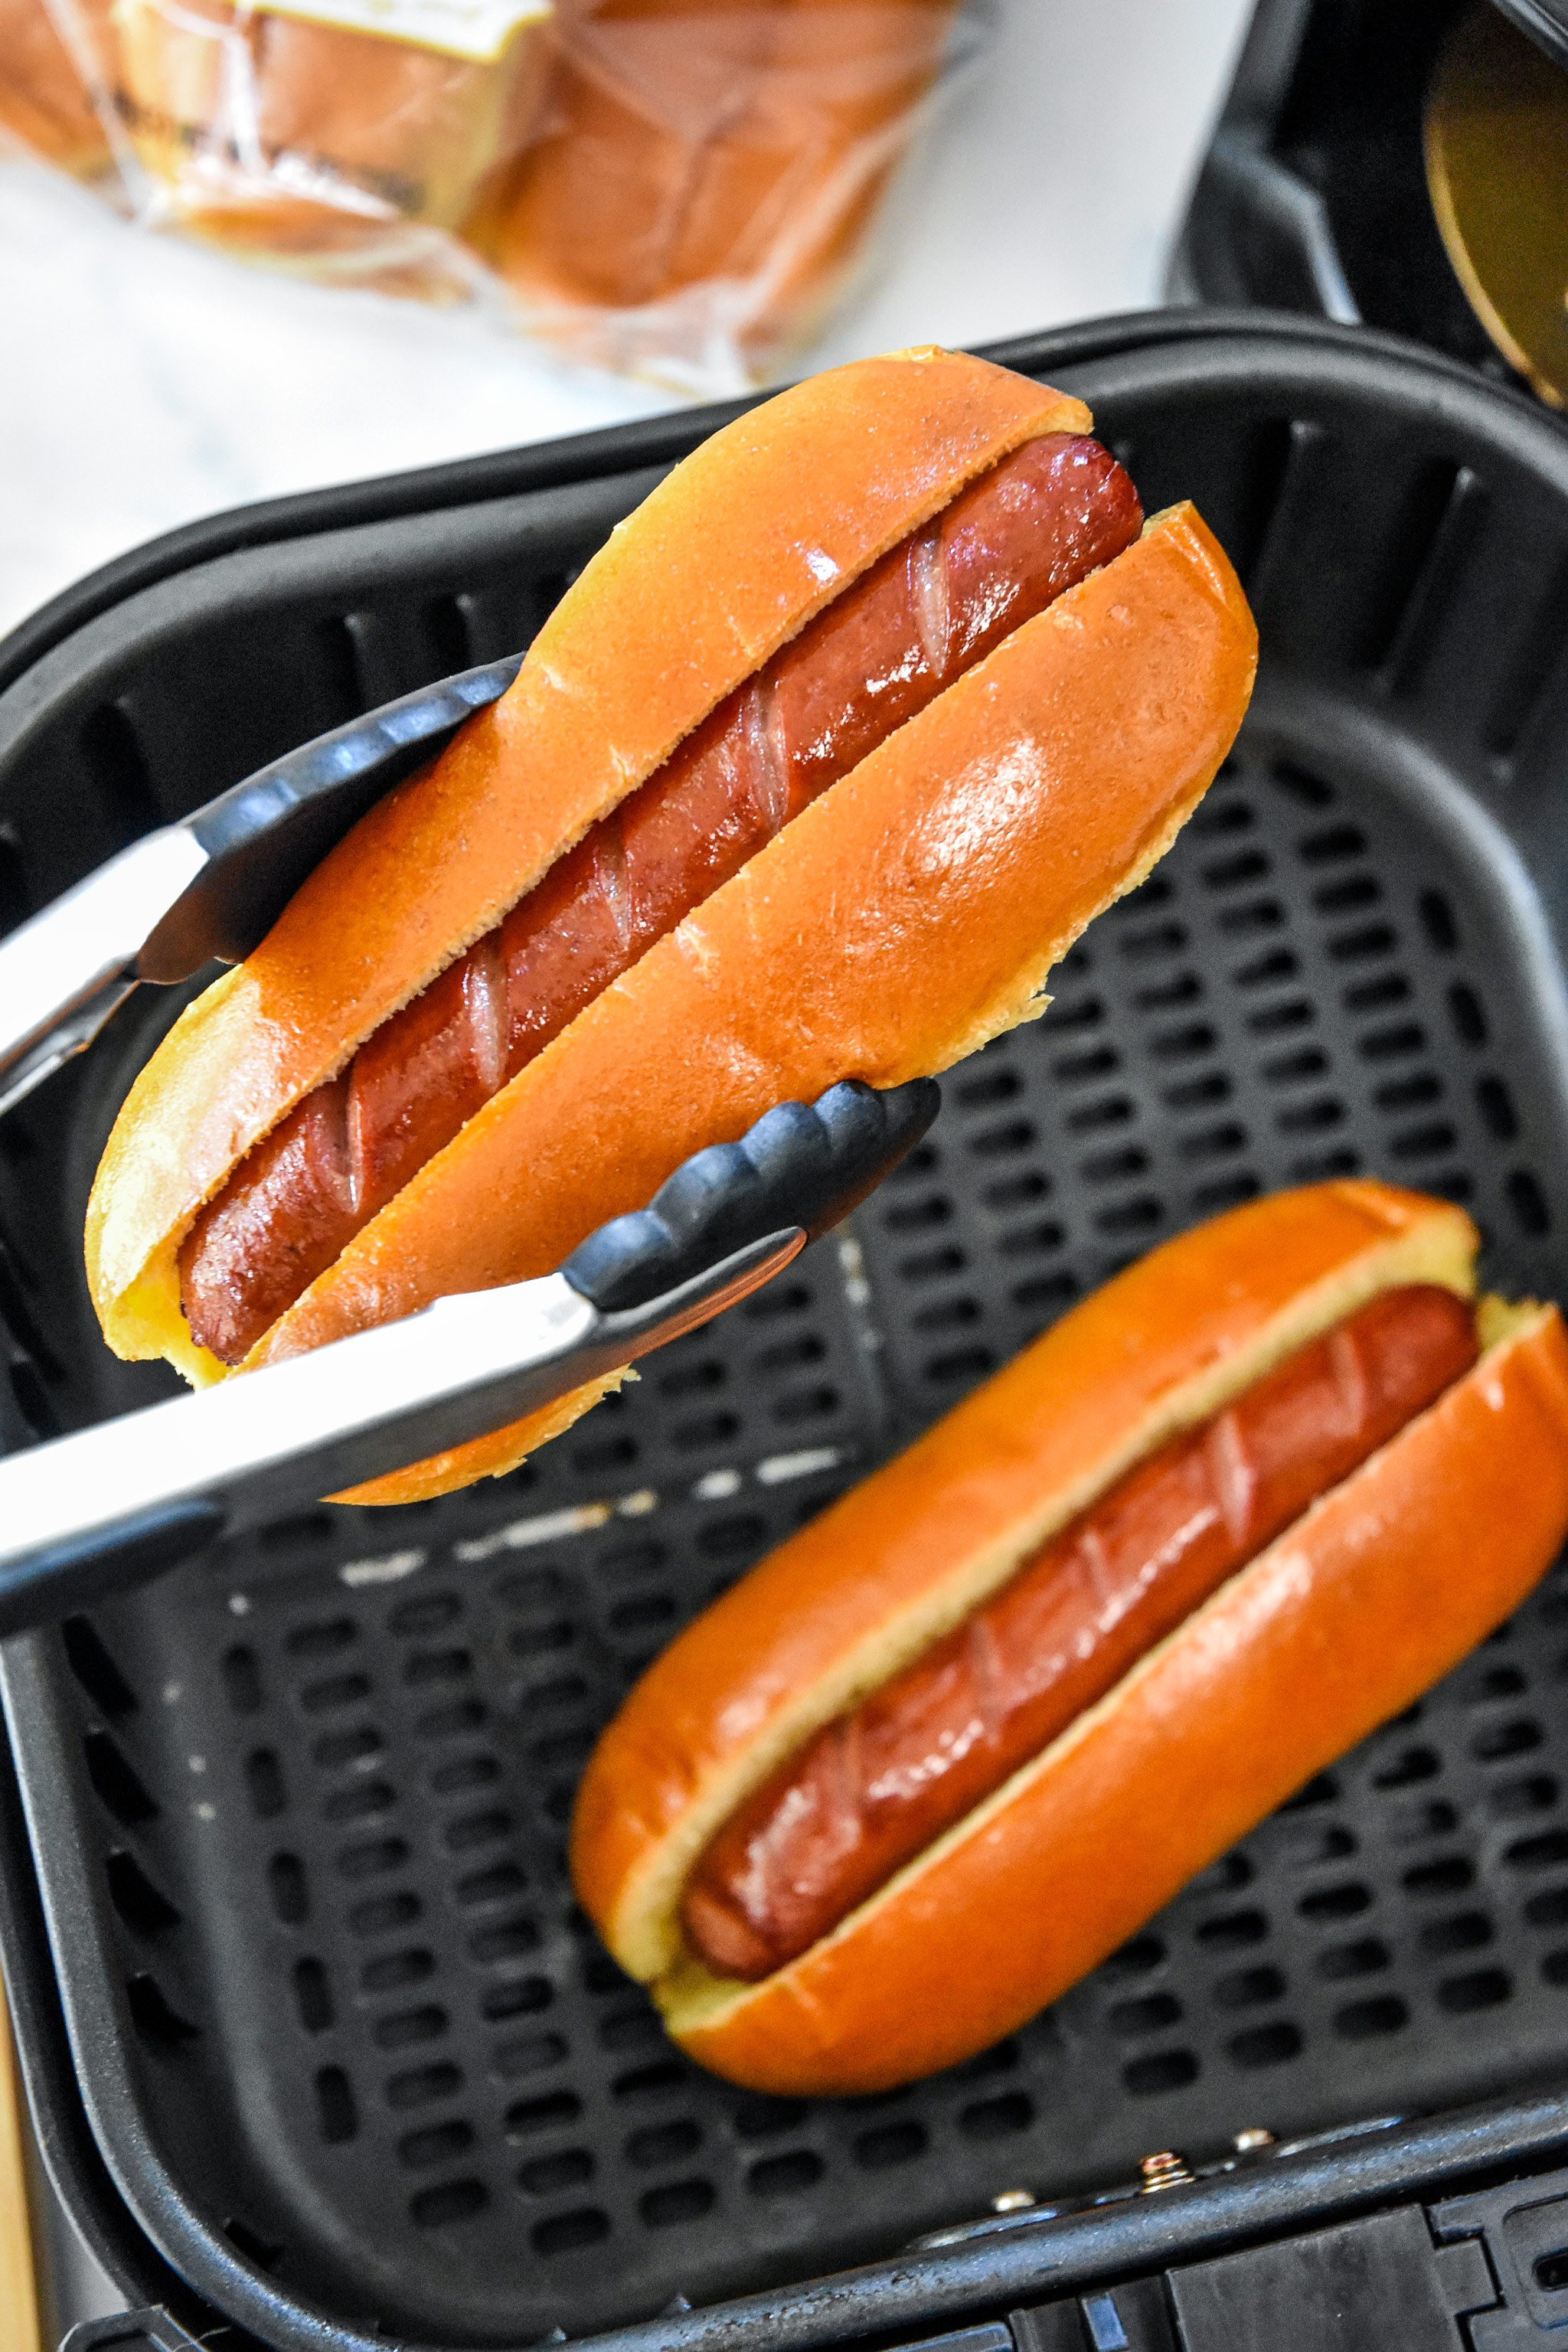 buns and hot dogs going into the air fryer basket.